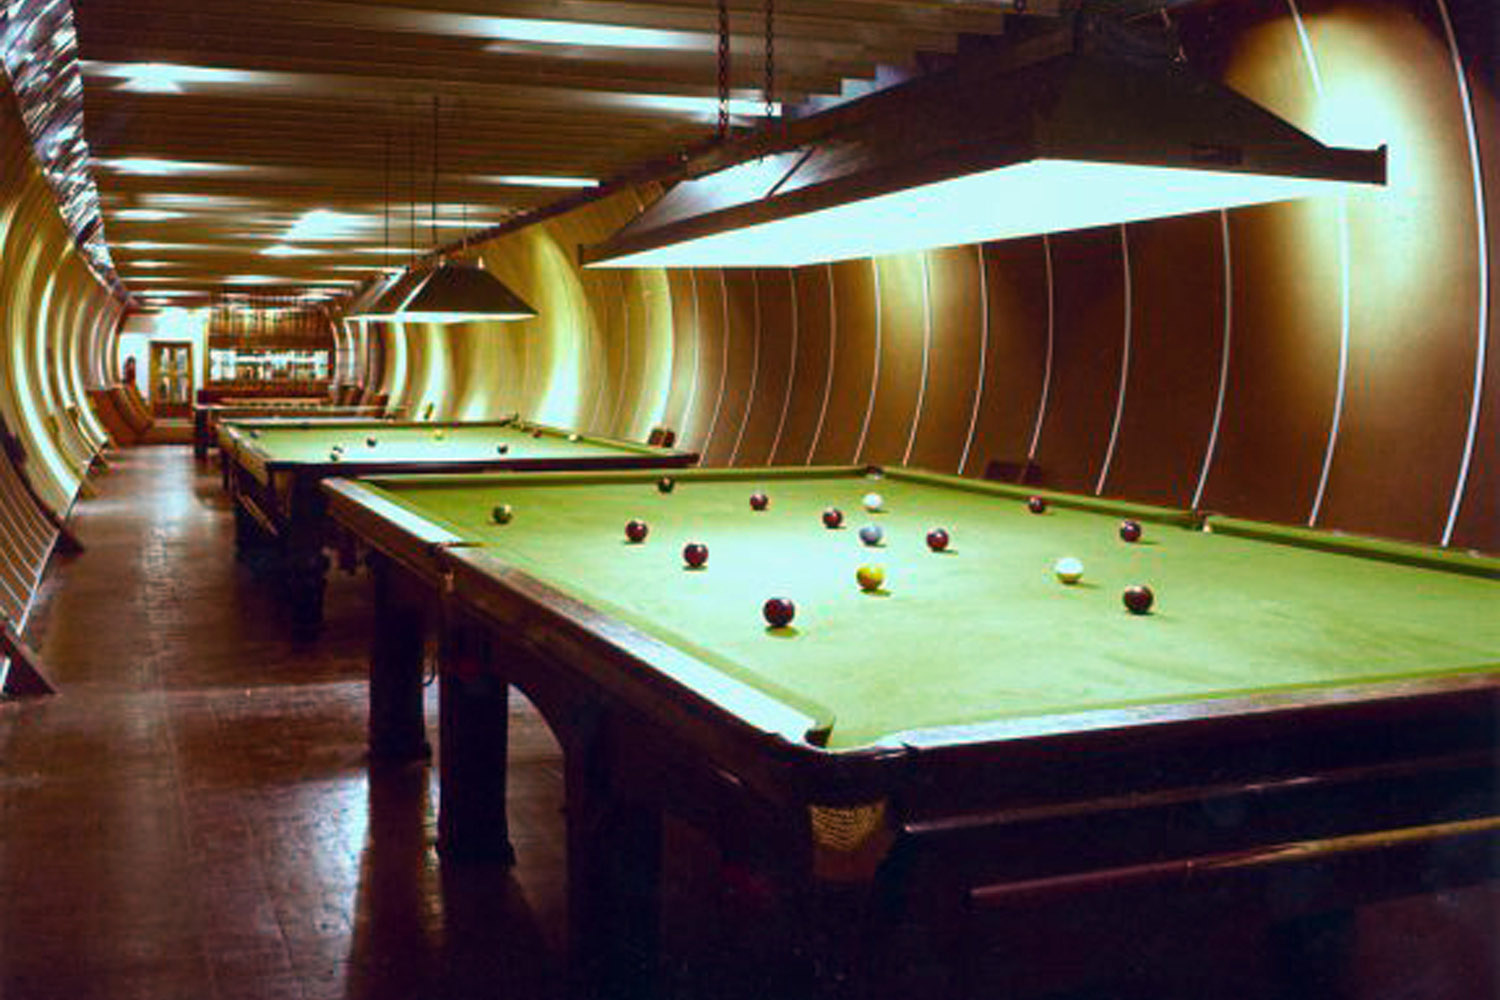 A billiards room from the British Telecommunications days